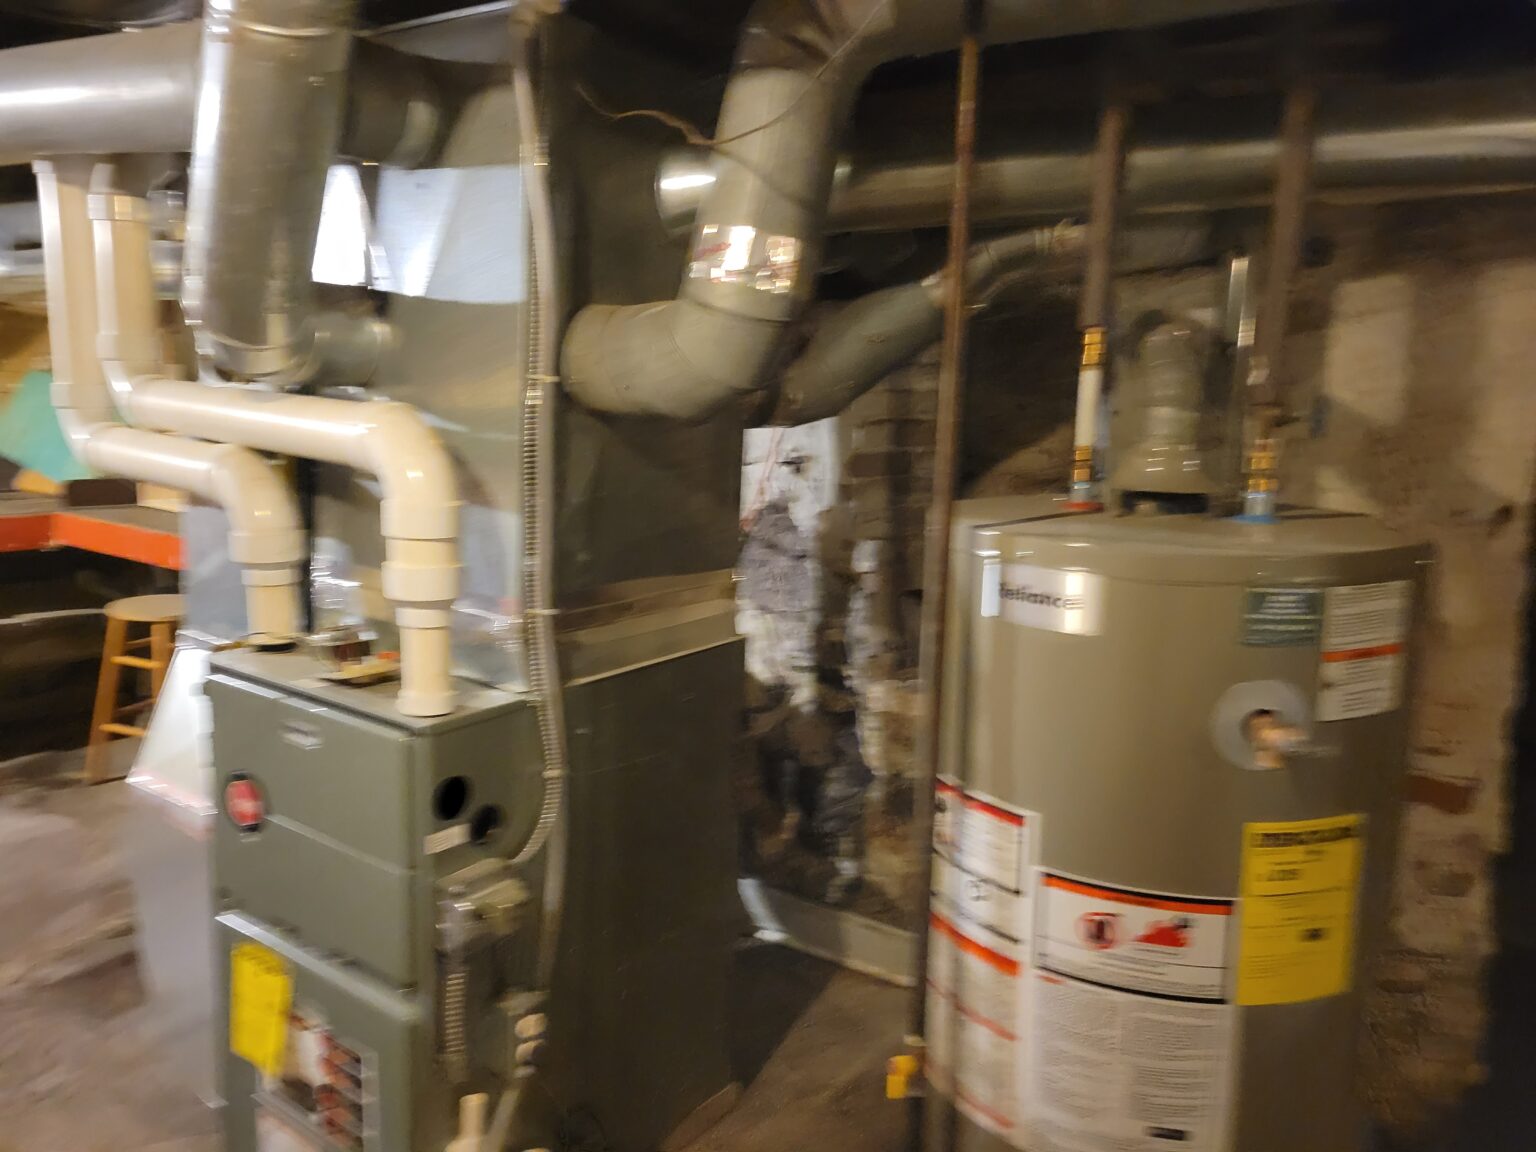 Furnace and Water Heater